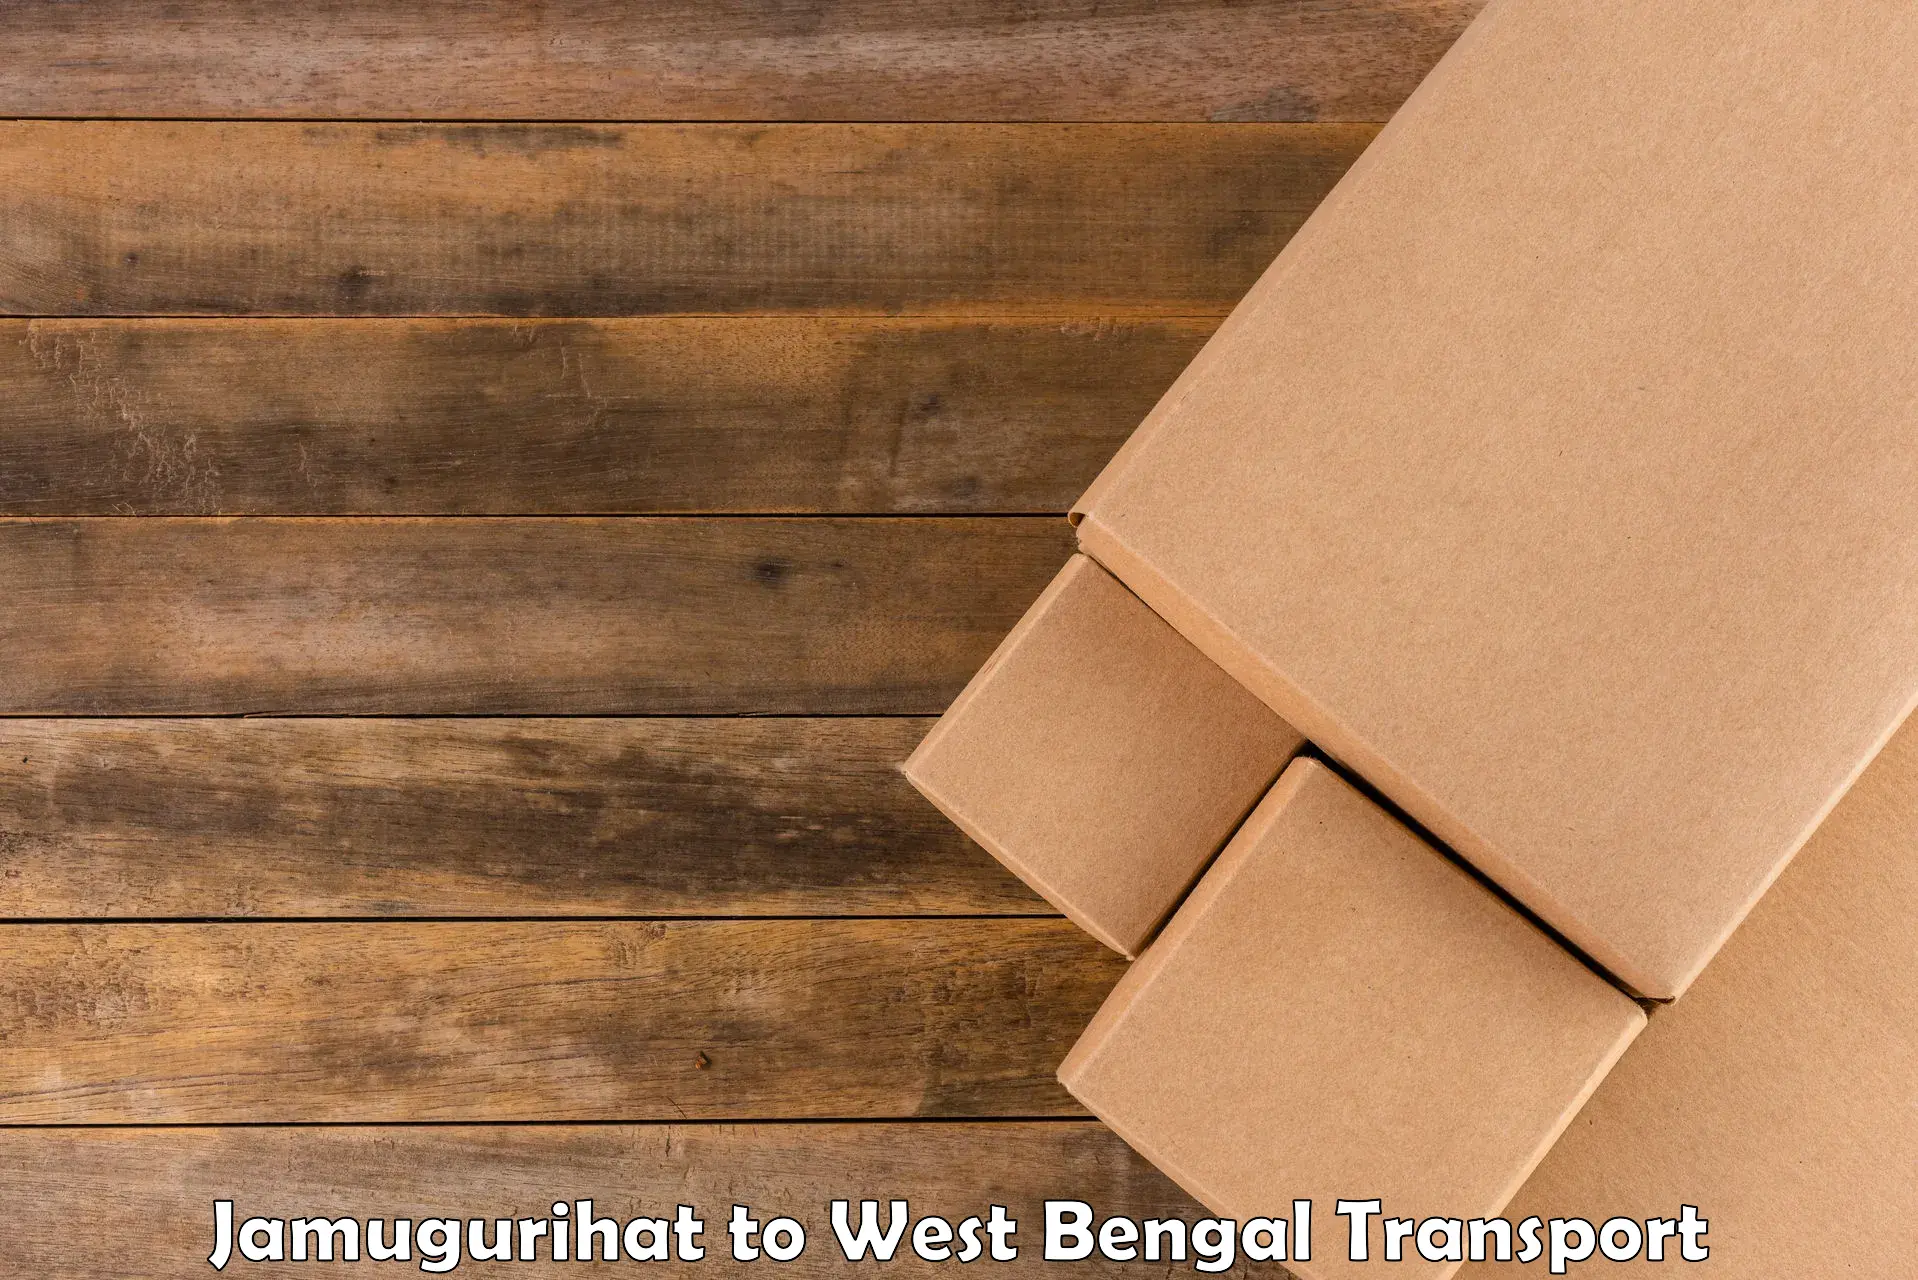 Air freight transport services Jamugurihat to Lalgola